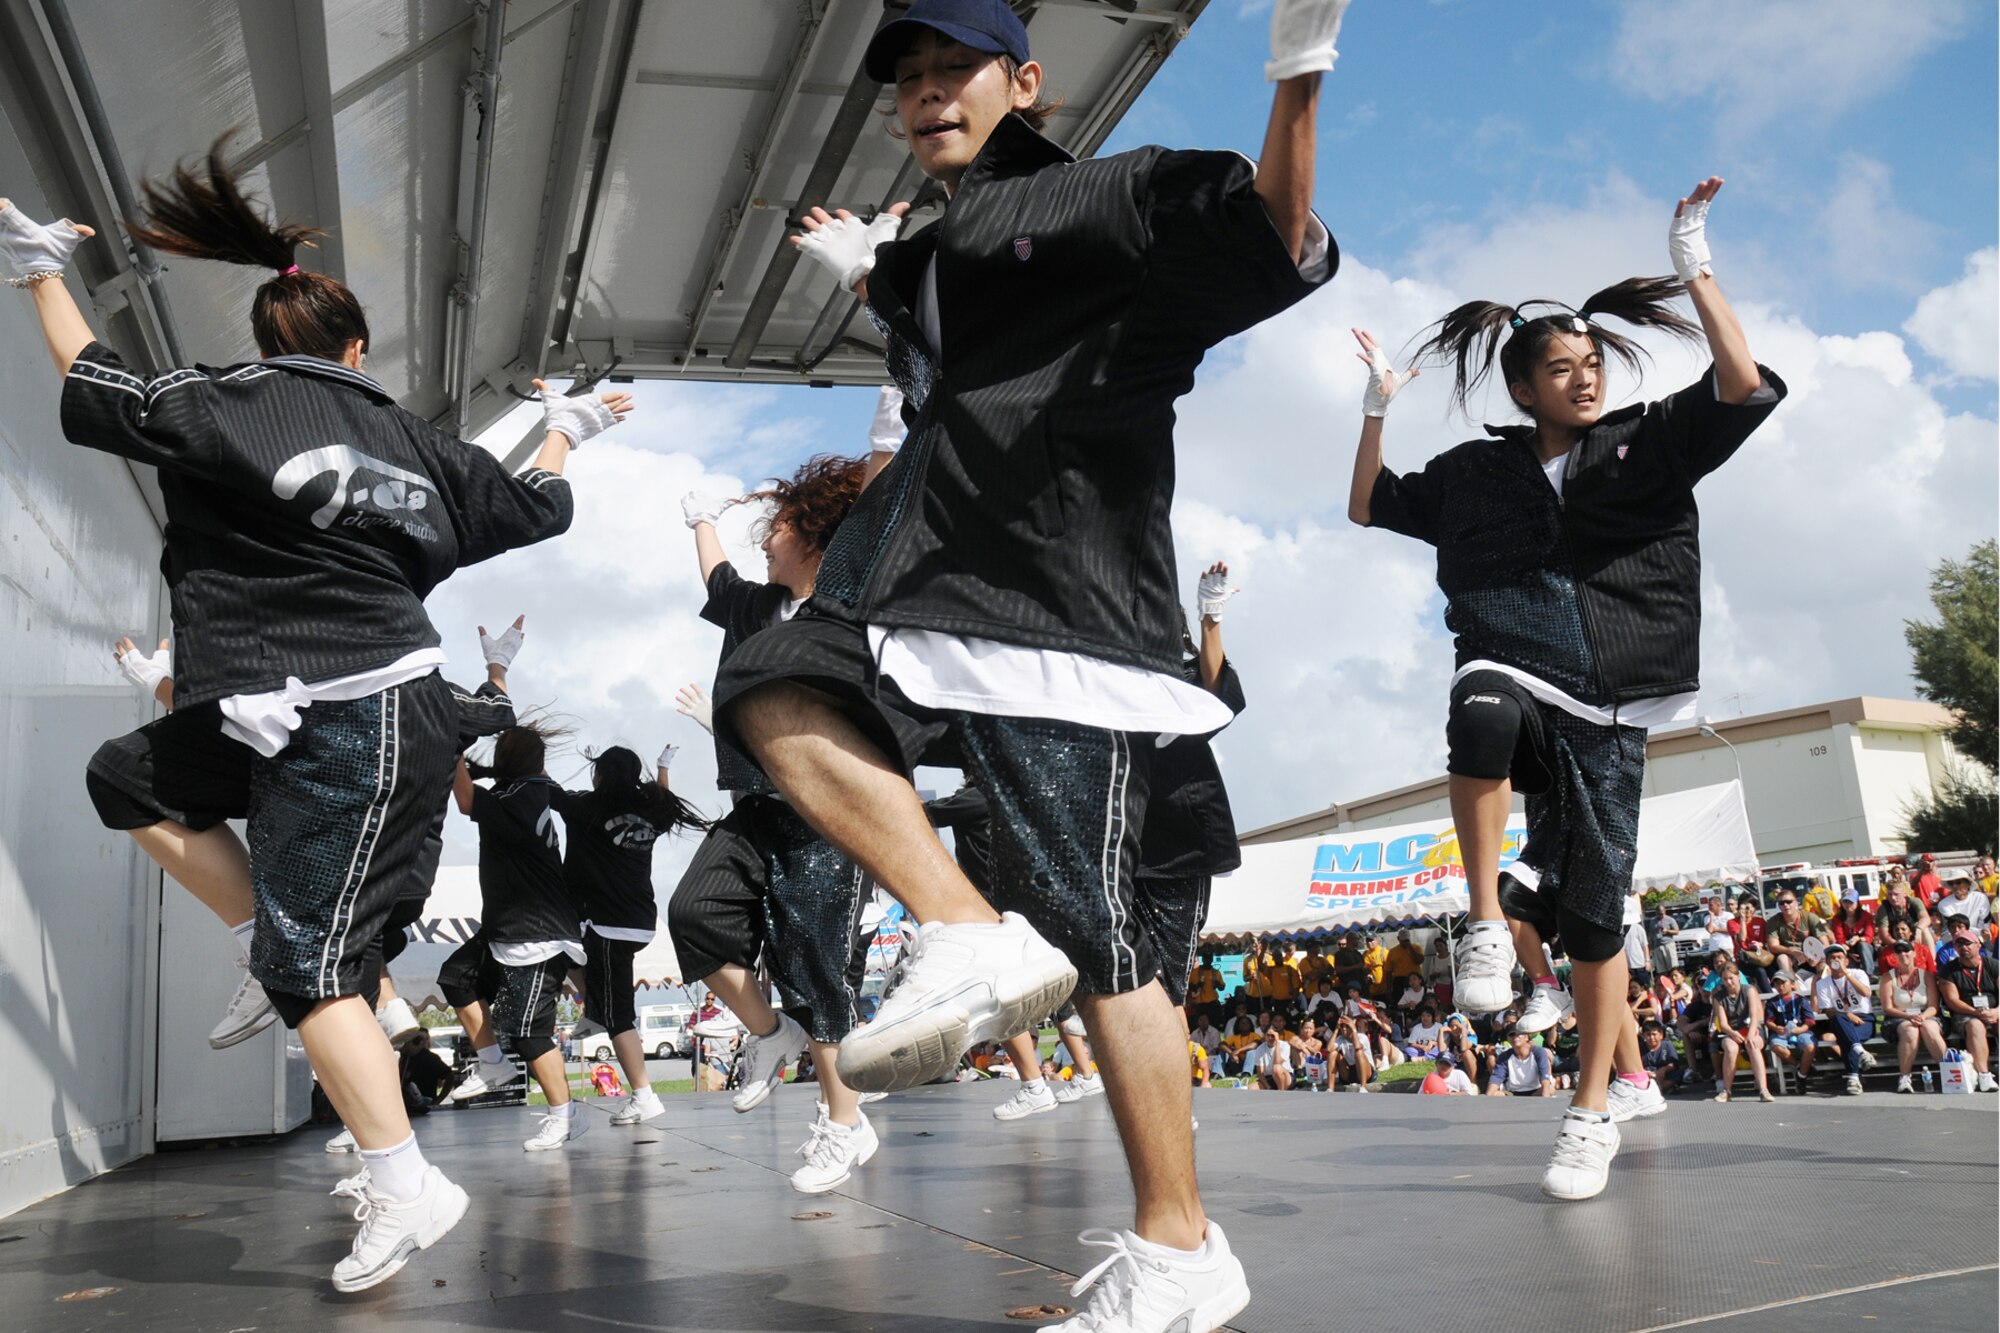 Members of the T-Da Dance Studio perform for the crowd during the Kadena Special Olympics Nov. 8, 2008. Kadena Air Base hosted the 9th Annual Special Olympic Games and Art Festival for special needs Okinawan and American athletes.  (U.S. Air Force photo/Airman 1st Class Chad Warren)
                                             